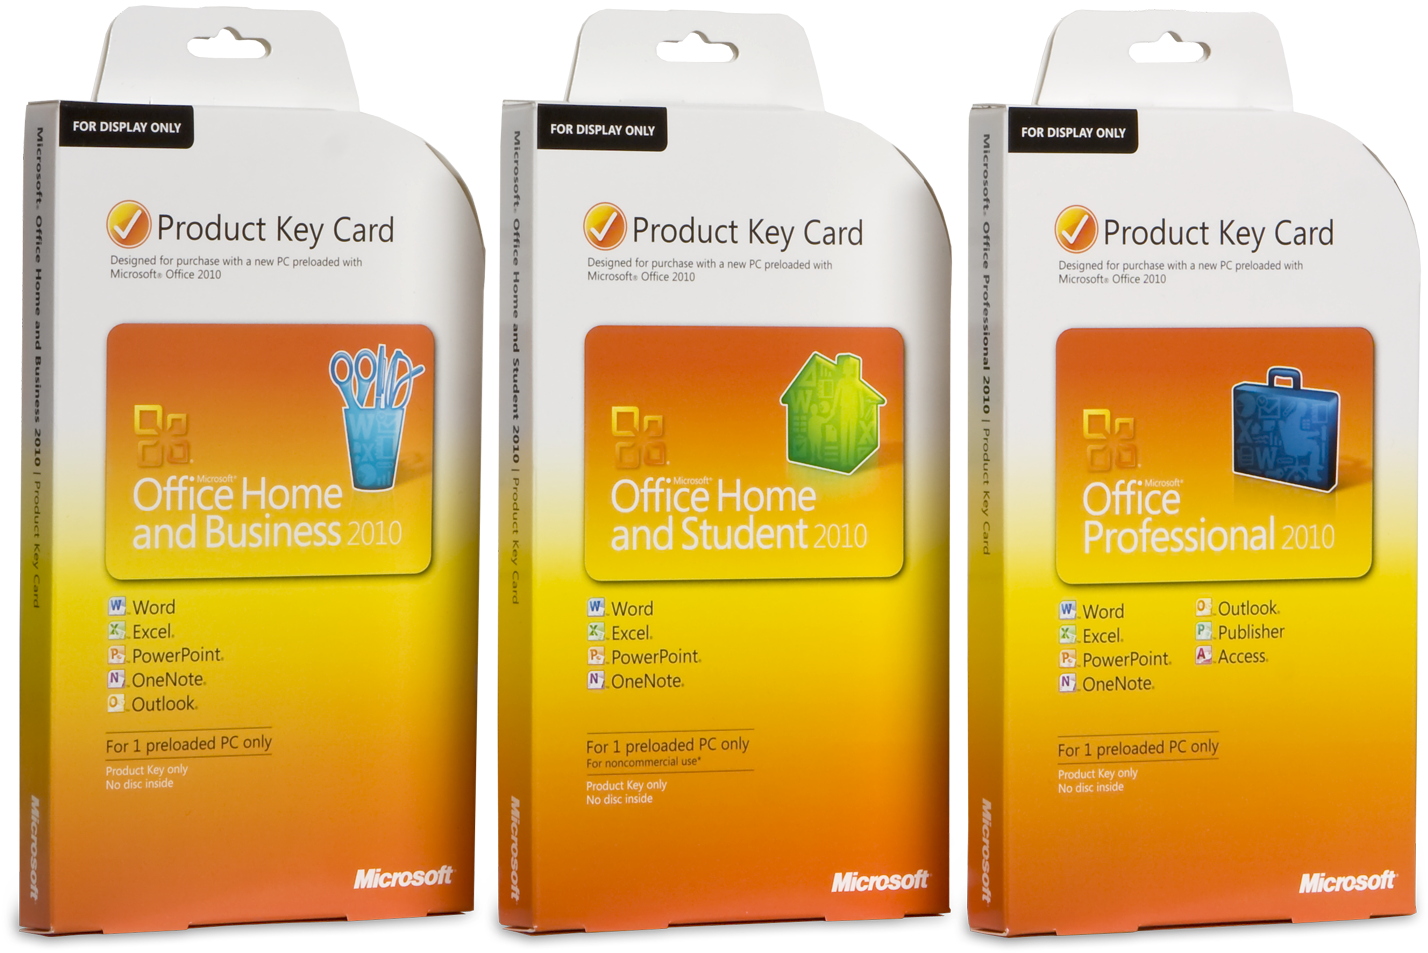 Microsoft Office - Office Home And Student 2010 (1500x985)